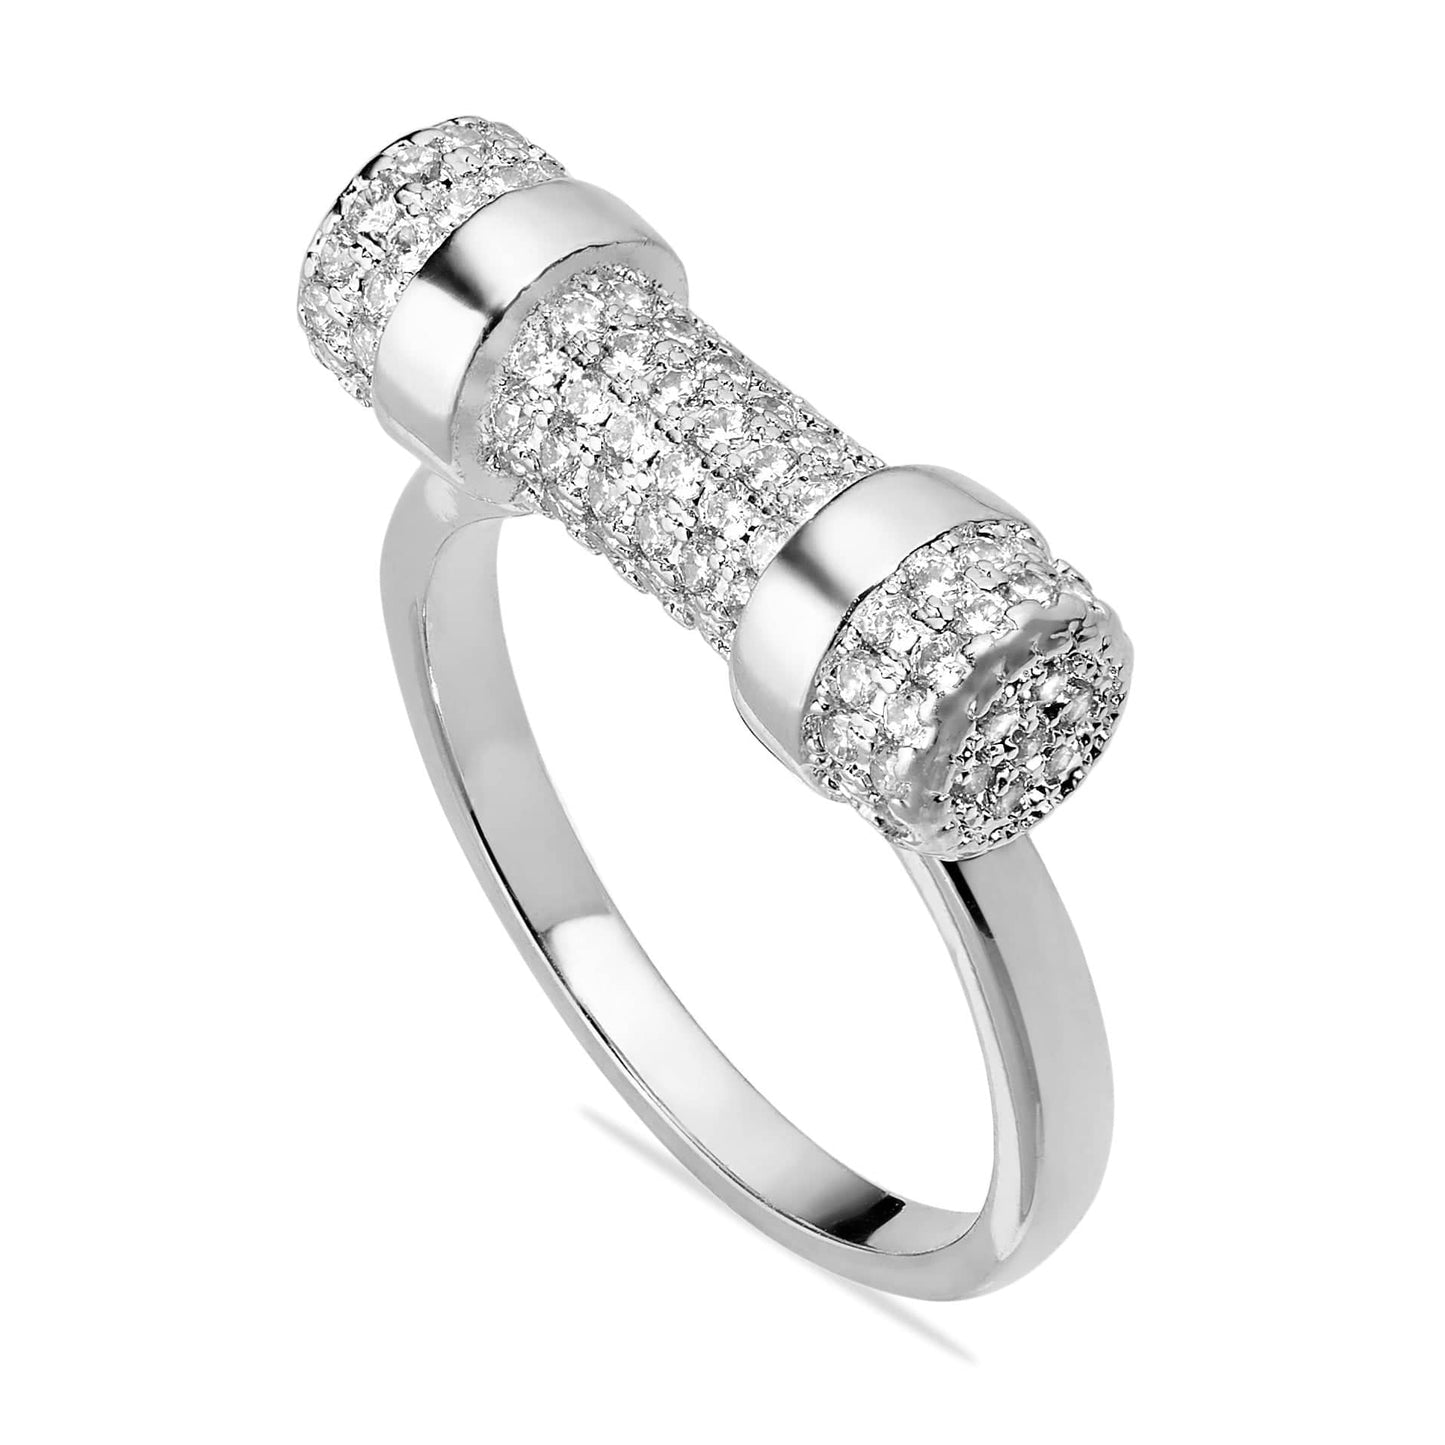 Opes Robur SILVER PAVE D RING